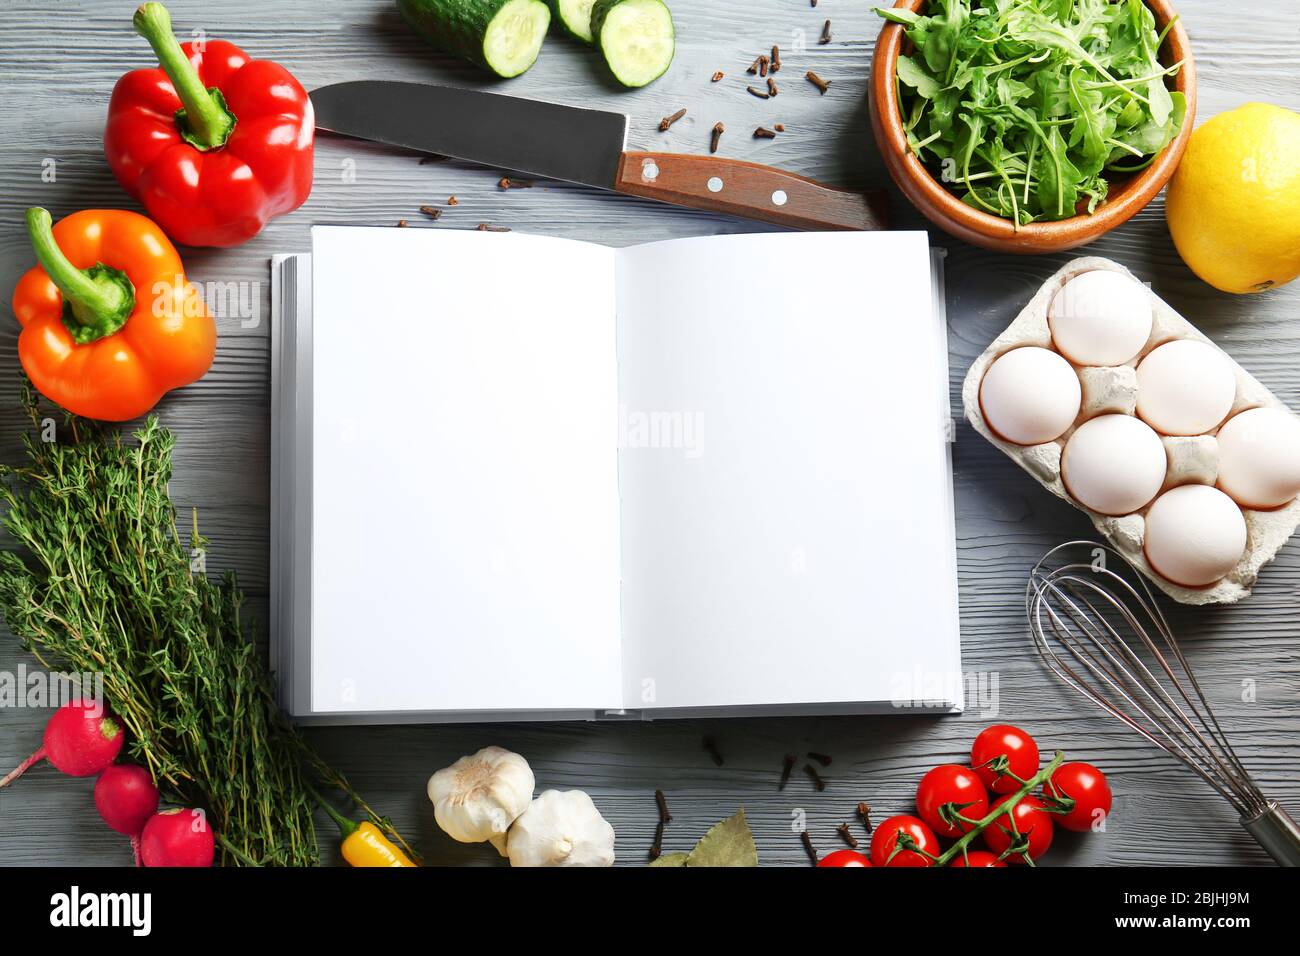 Open Notebook And Vegetables On Kitchen Table Cooking Classes Concept Stock Photo Alamy